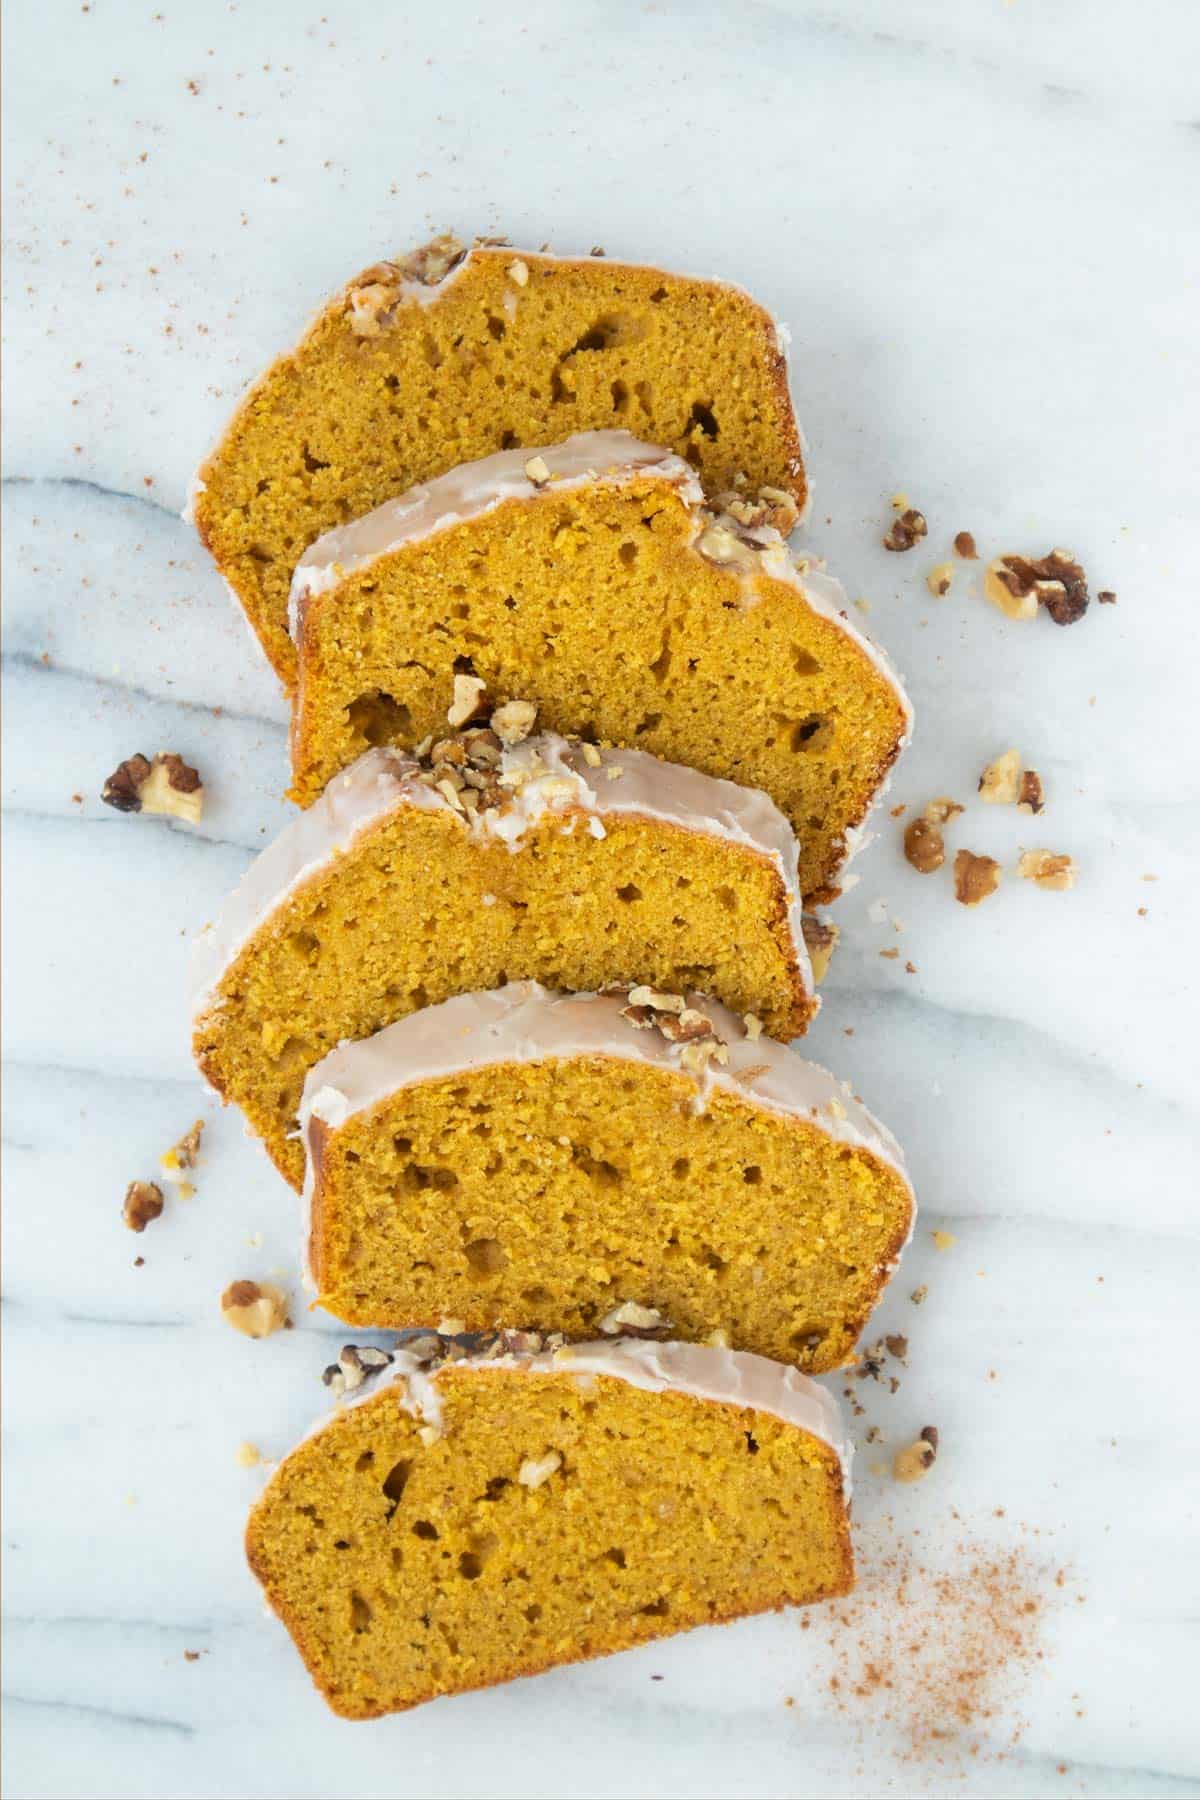 pumpkin loaf cake in slices with walnuts pieces around.